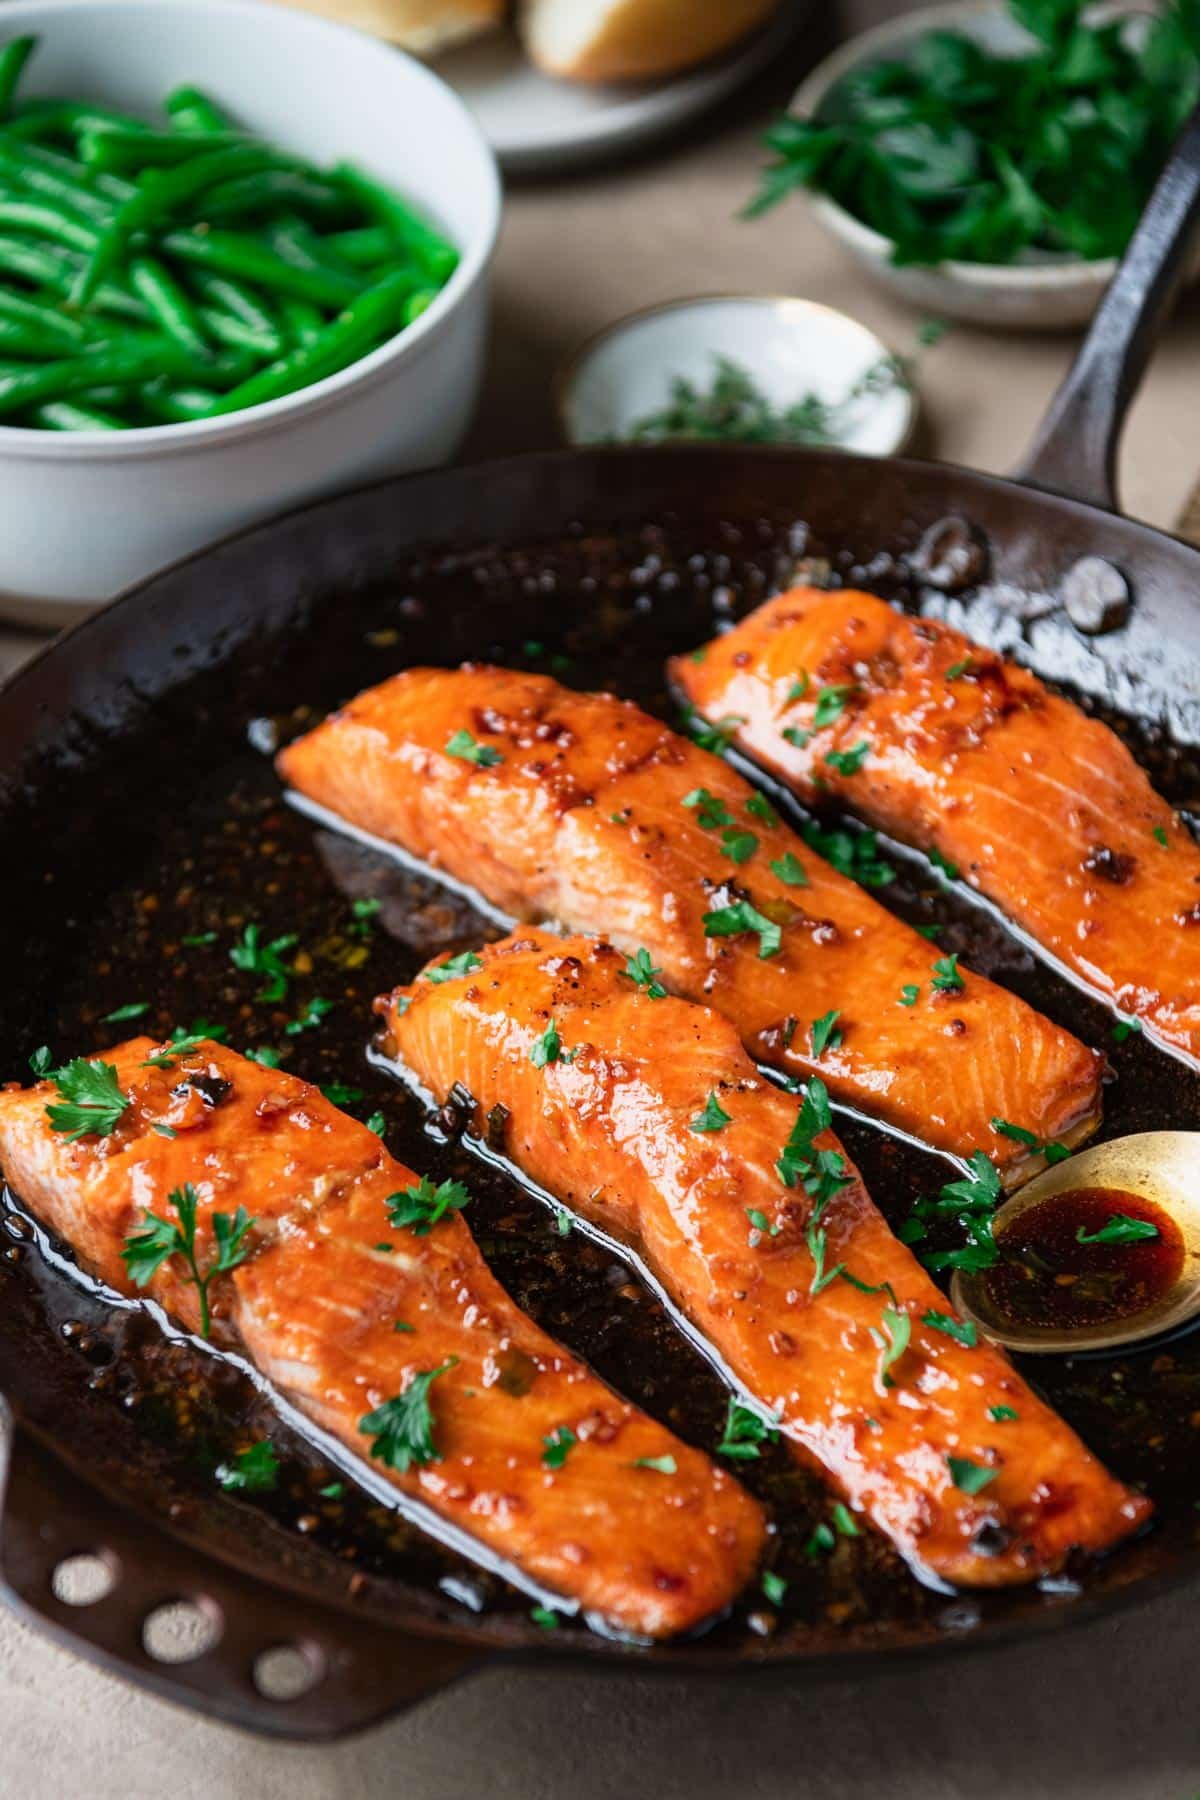 Four pieces of bourbon glazed salmon in a cast iron skillet